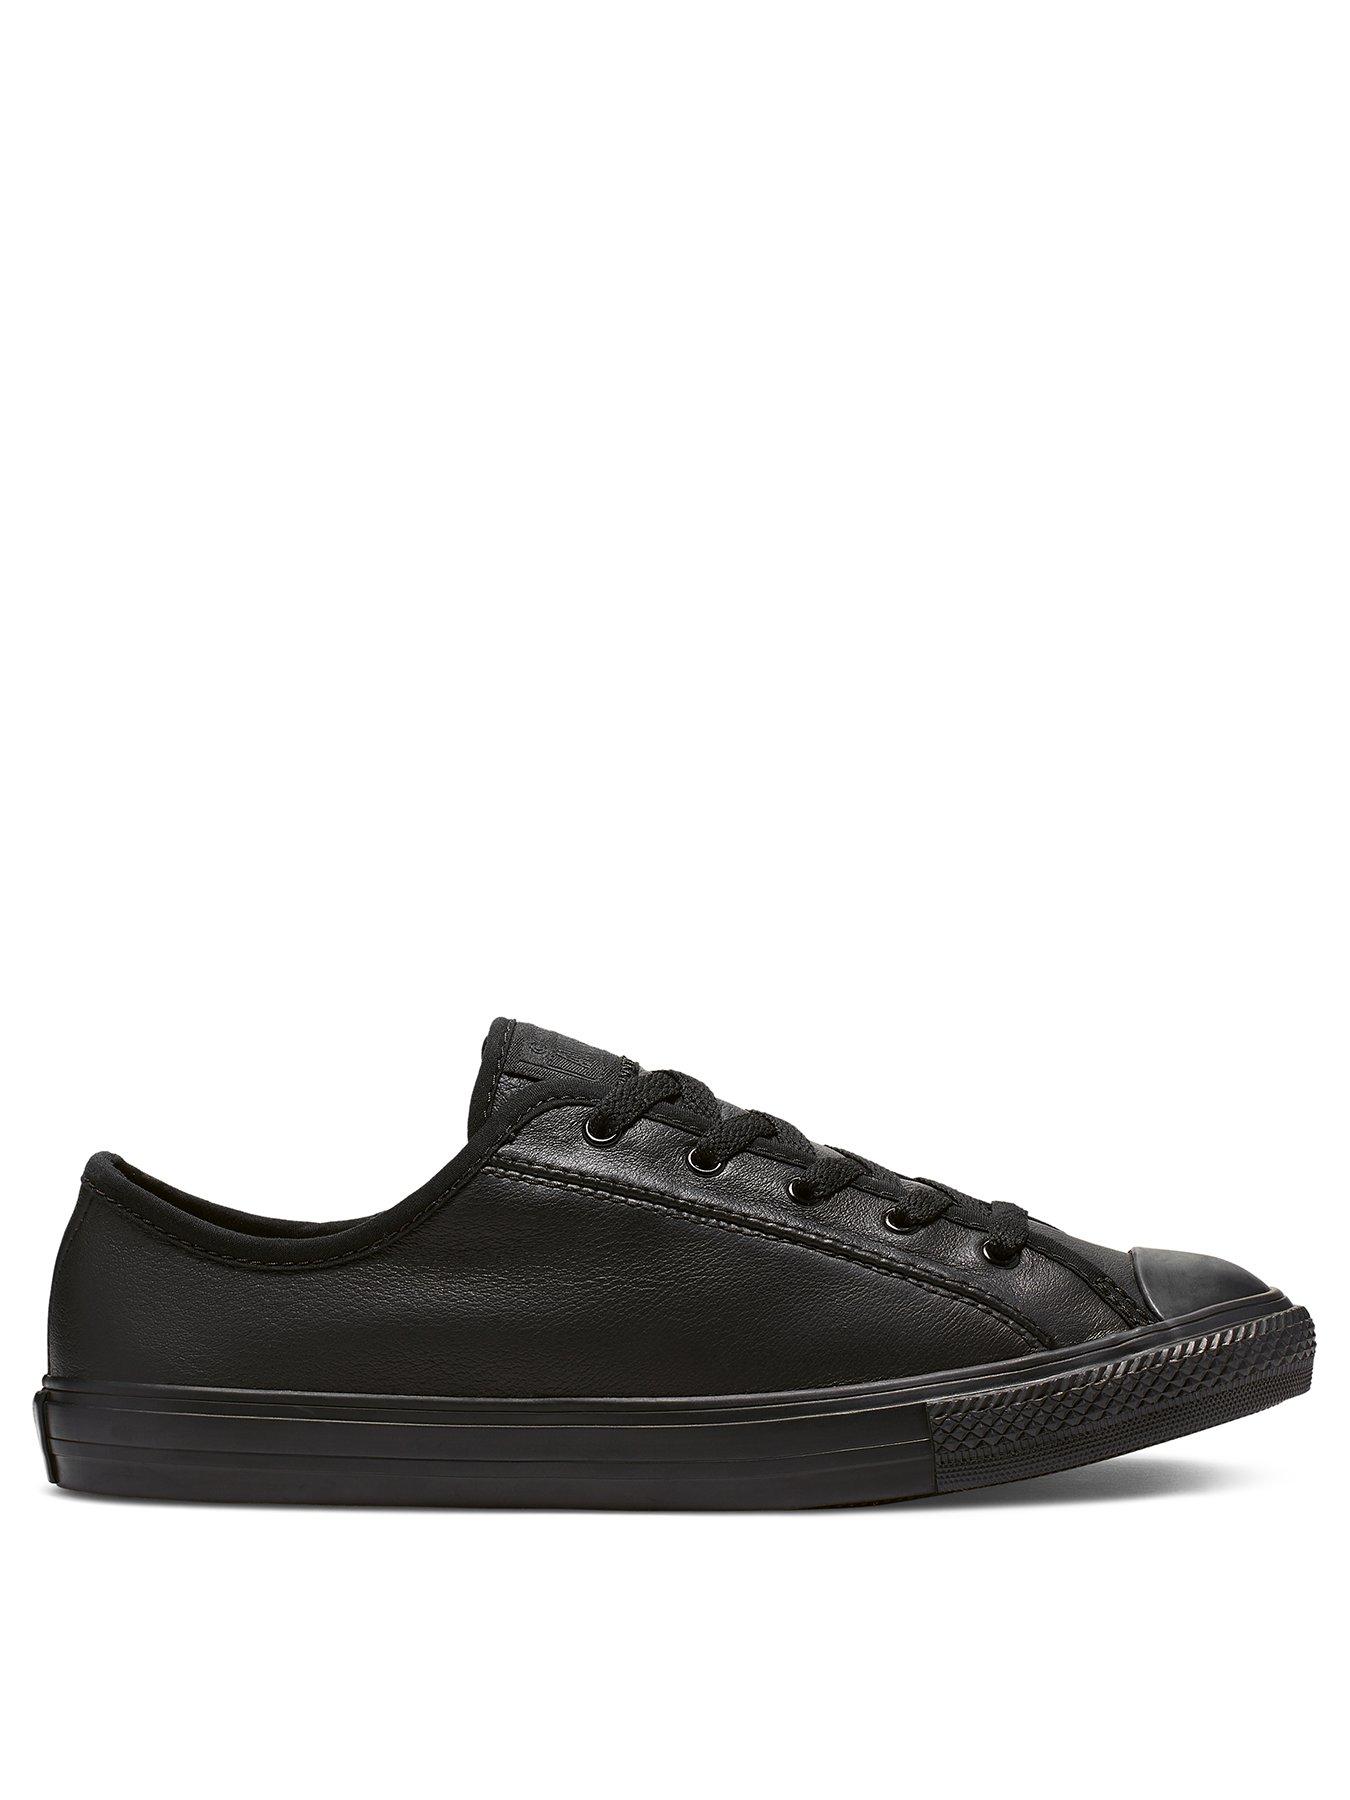 Converse Chuck Taylor All Star Leather Dainty Ox Plimsolls - Black |  very.co.uk